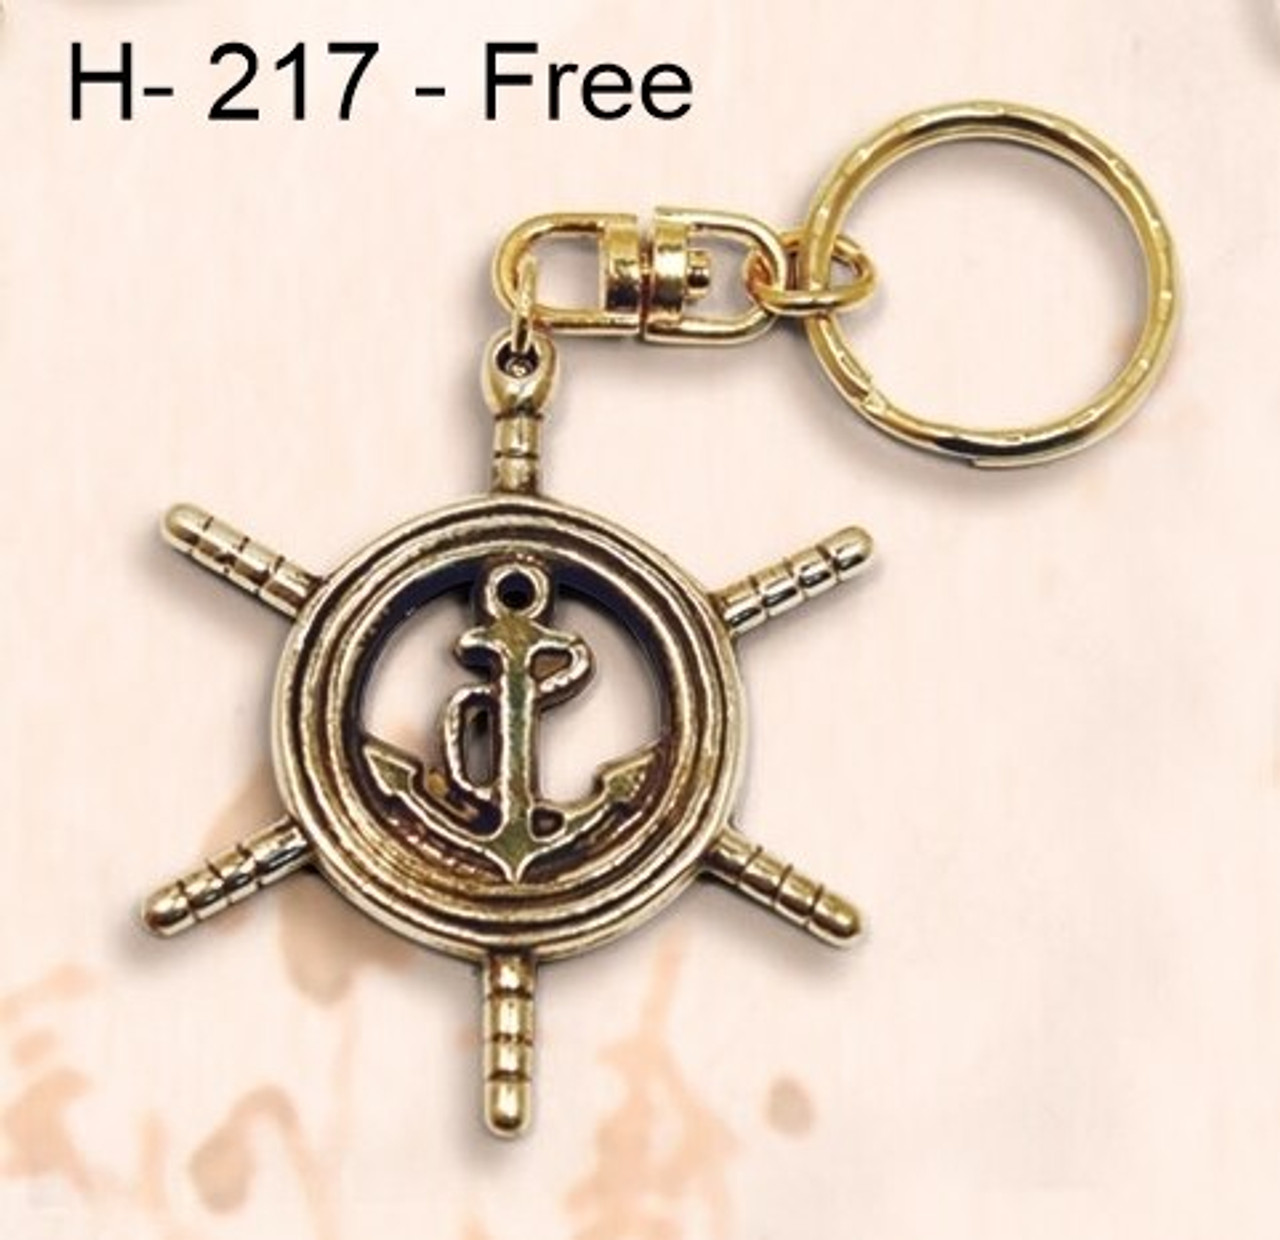 H - 217 -  Ship's Wheel/Anchor Key Chain Option
Free with Purchase of (BP-710) 17.25" Wooden Ships Wheel Mirror